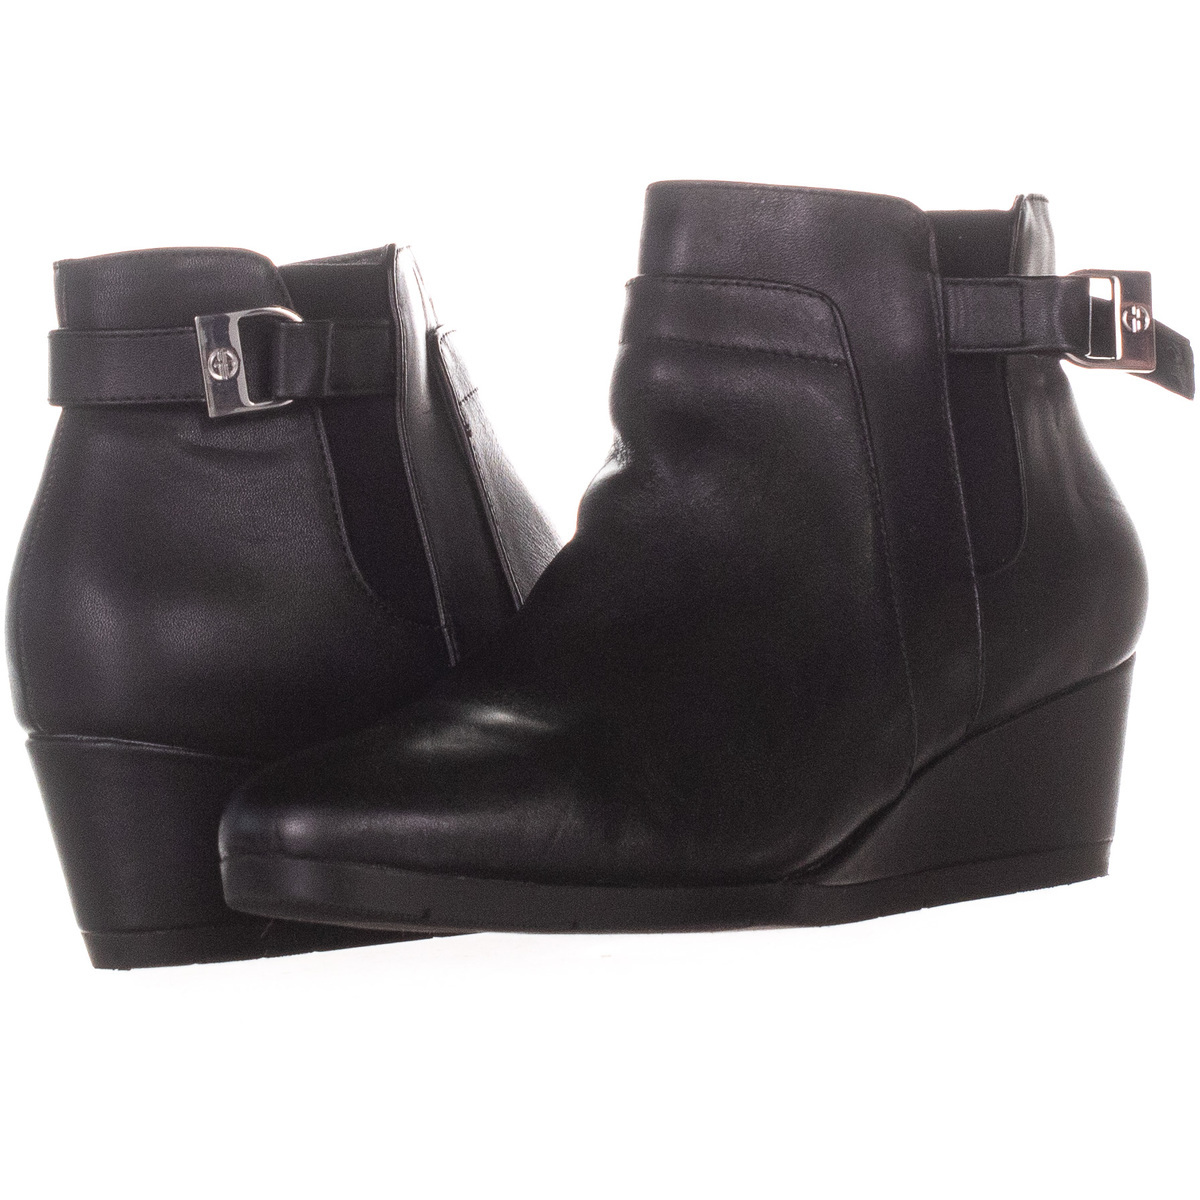 Giani Bernini 54 Wedge Ankle Boots 008, BlackLeather, 6 US - Boots